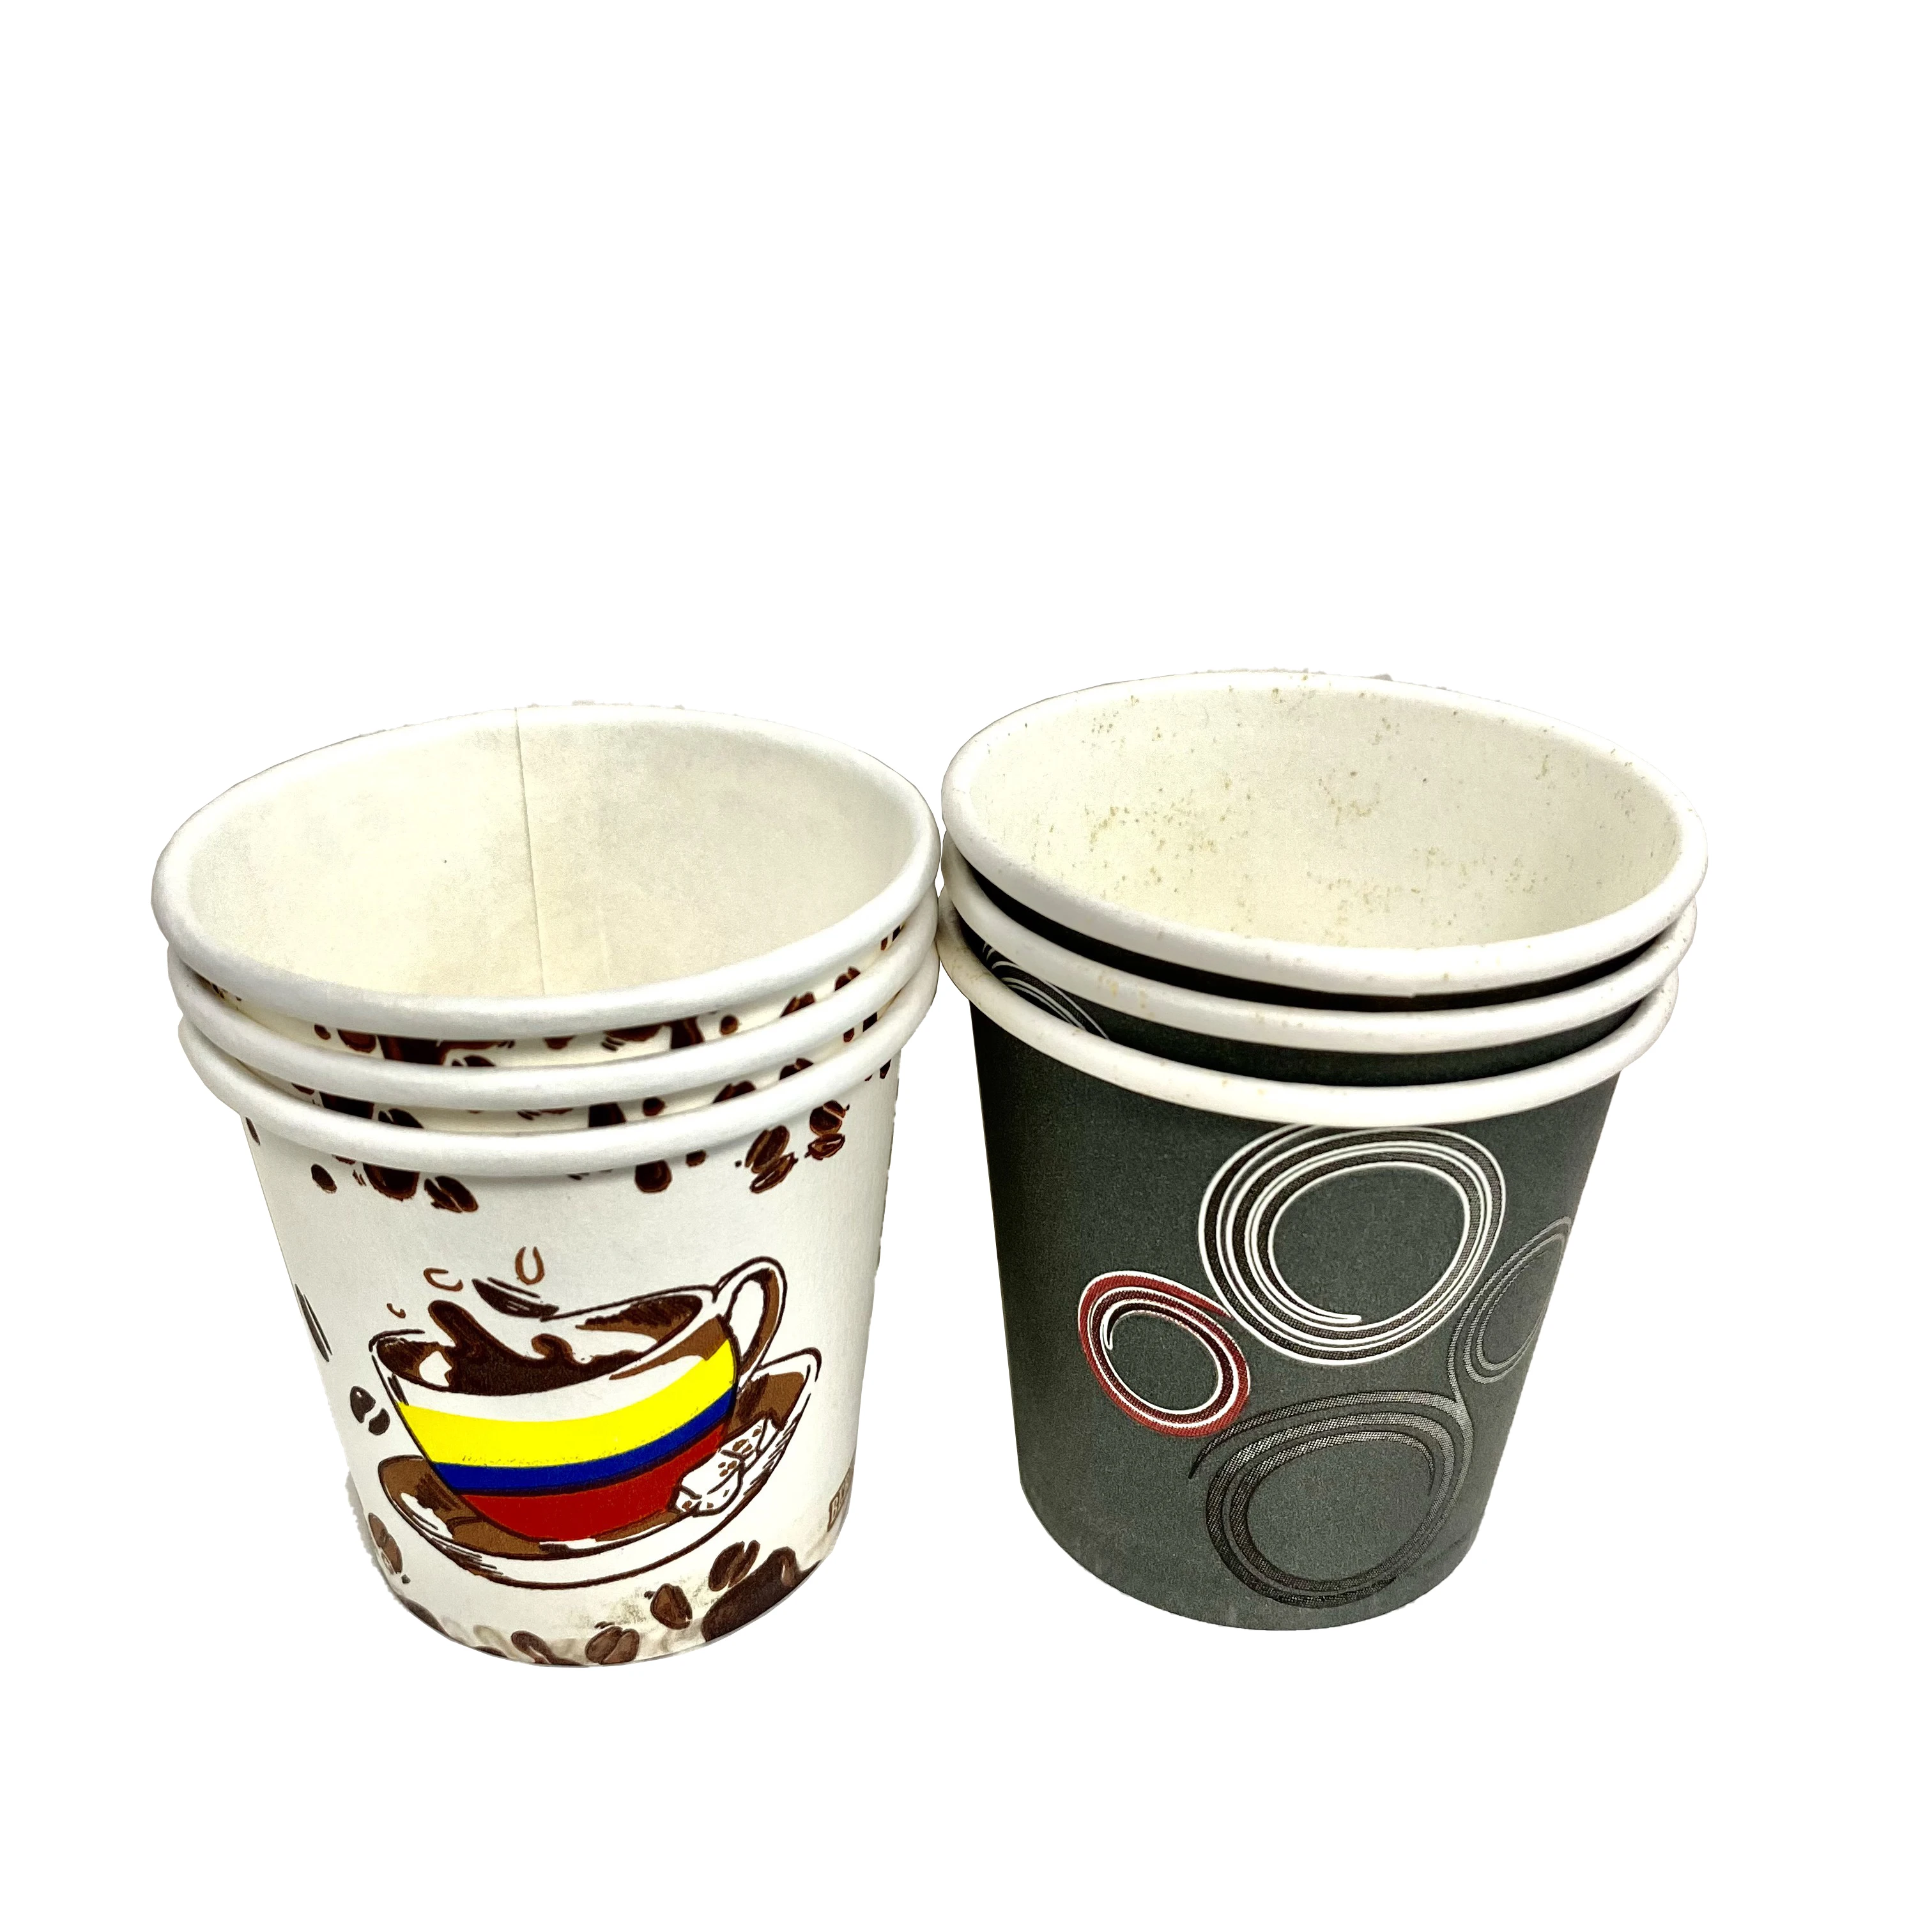 Wholesale Disposable 4oz 8oz 10oz 12oz 16oz Paper Cups Hot/Cold Beverage Drinking Cup with Custom Printed